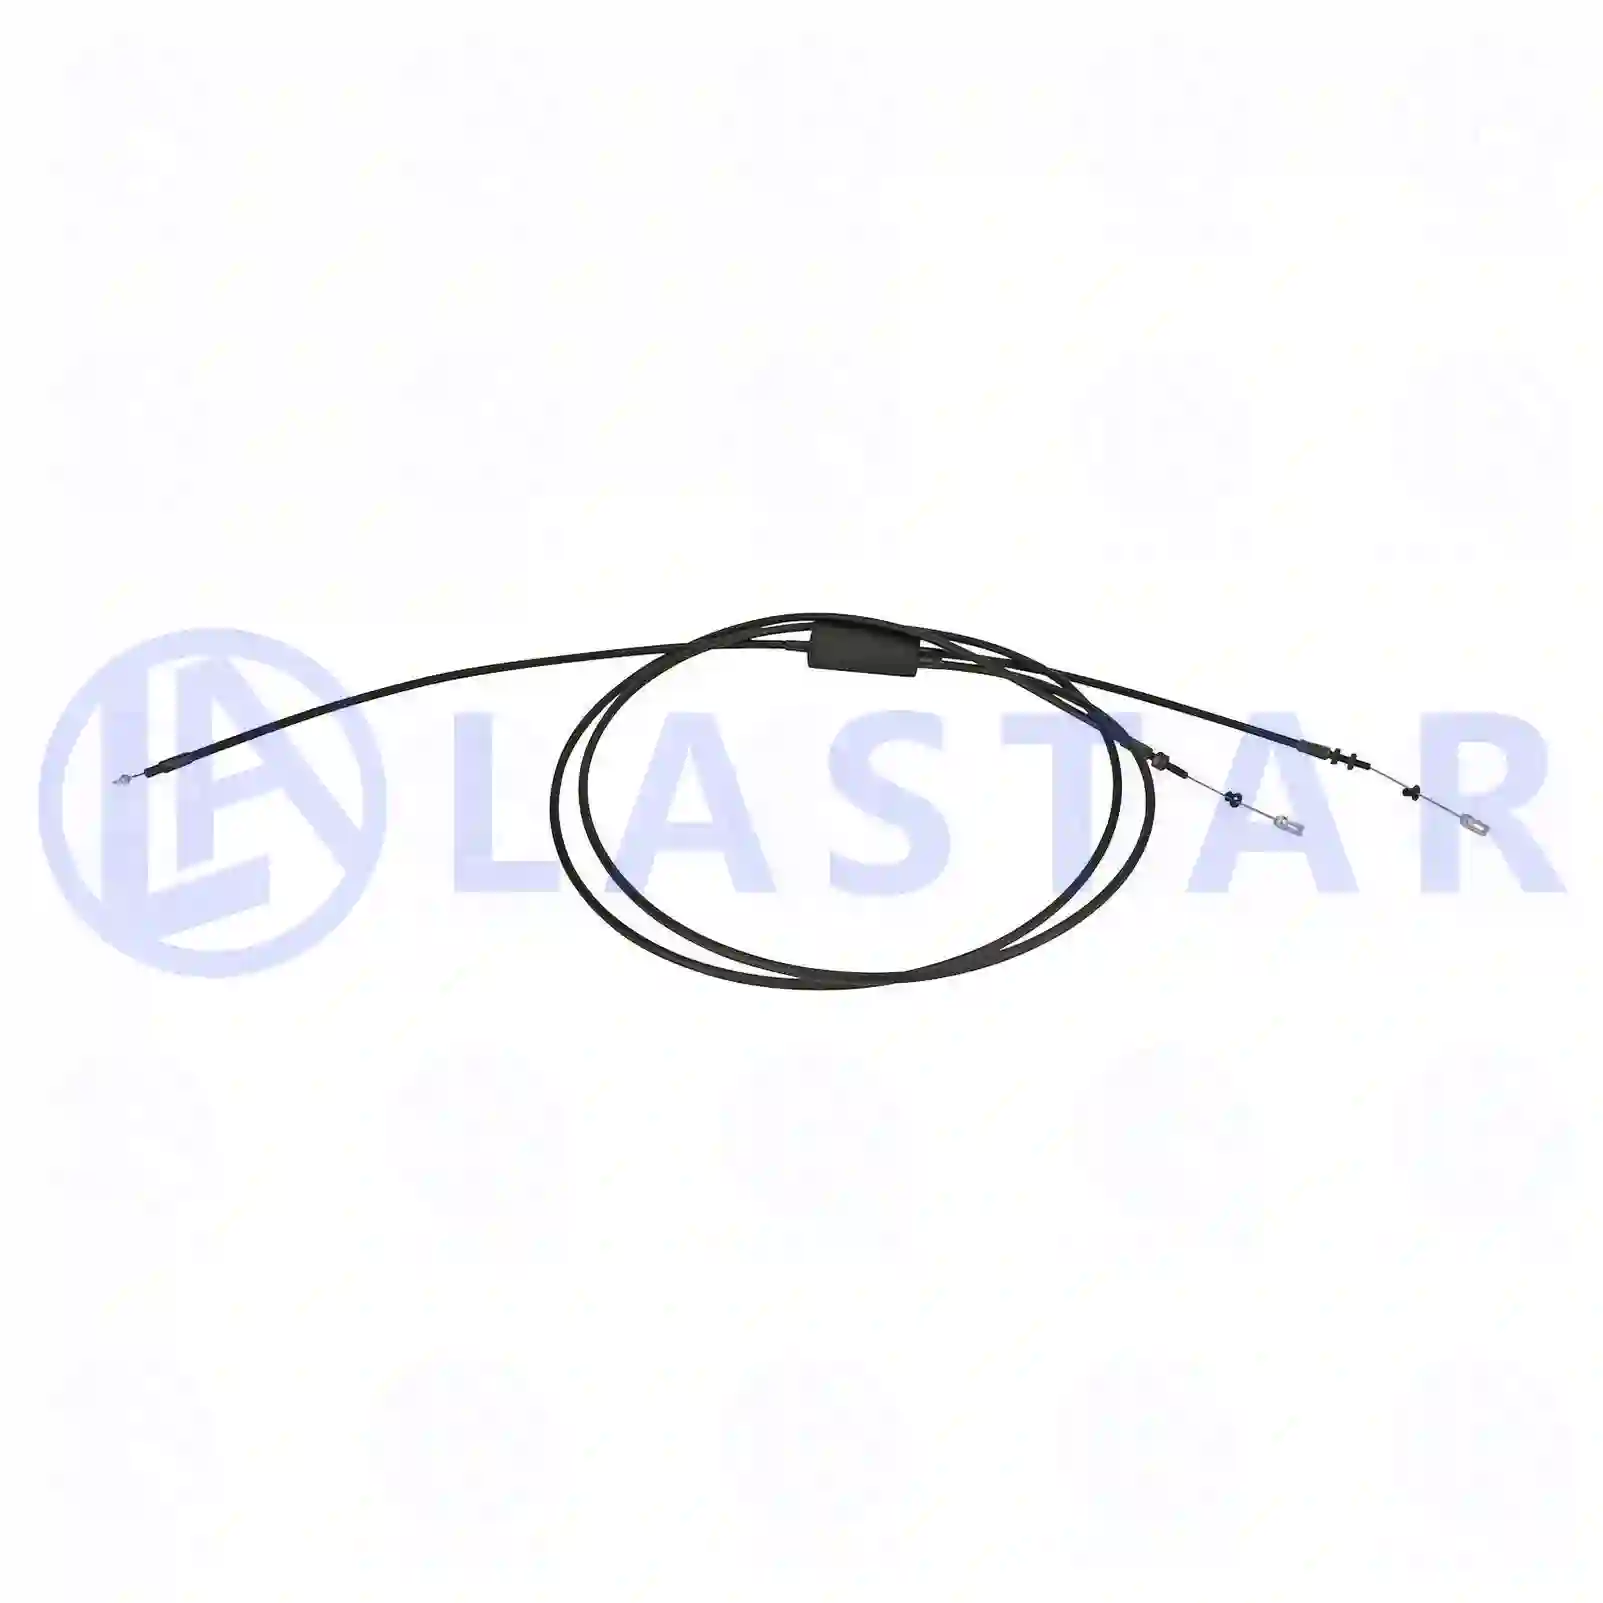 Control wire, front flap, 77721435, 1926077, , ||  77721435 Lastar Spare Part | Truck Spare Parts, Auotomotive Spare Parts Control wire, front flap, 77721435, 1926077, , ||  77721435 Lastar Spare Part | Truck Spare Parts, Auotomotive Spare Parts